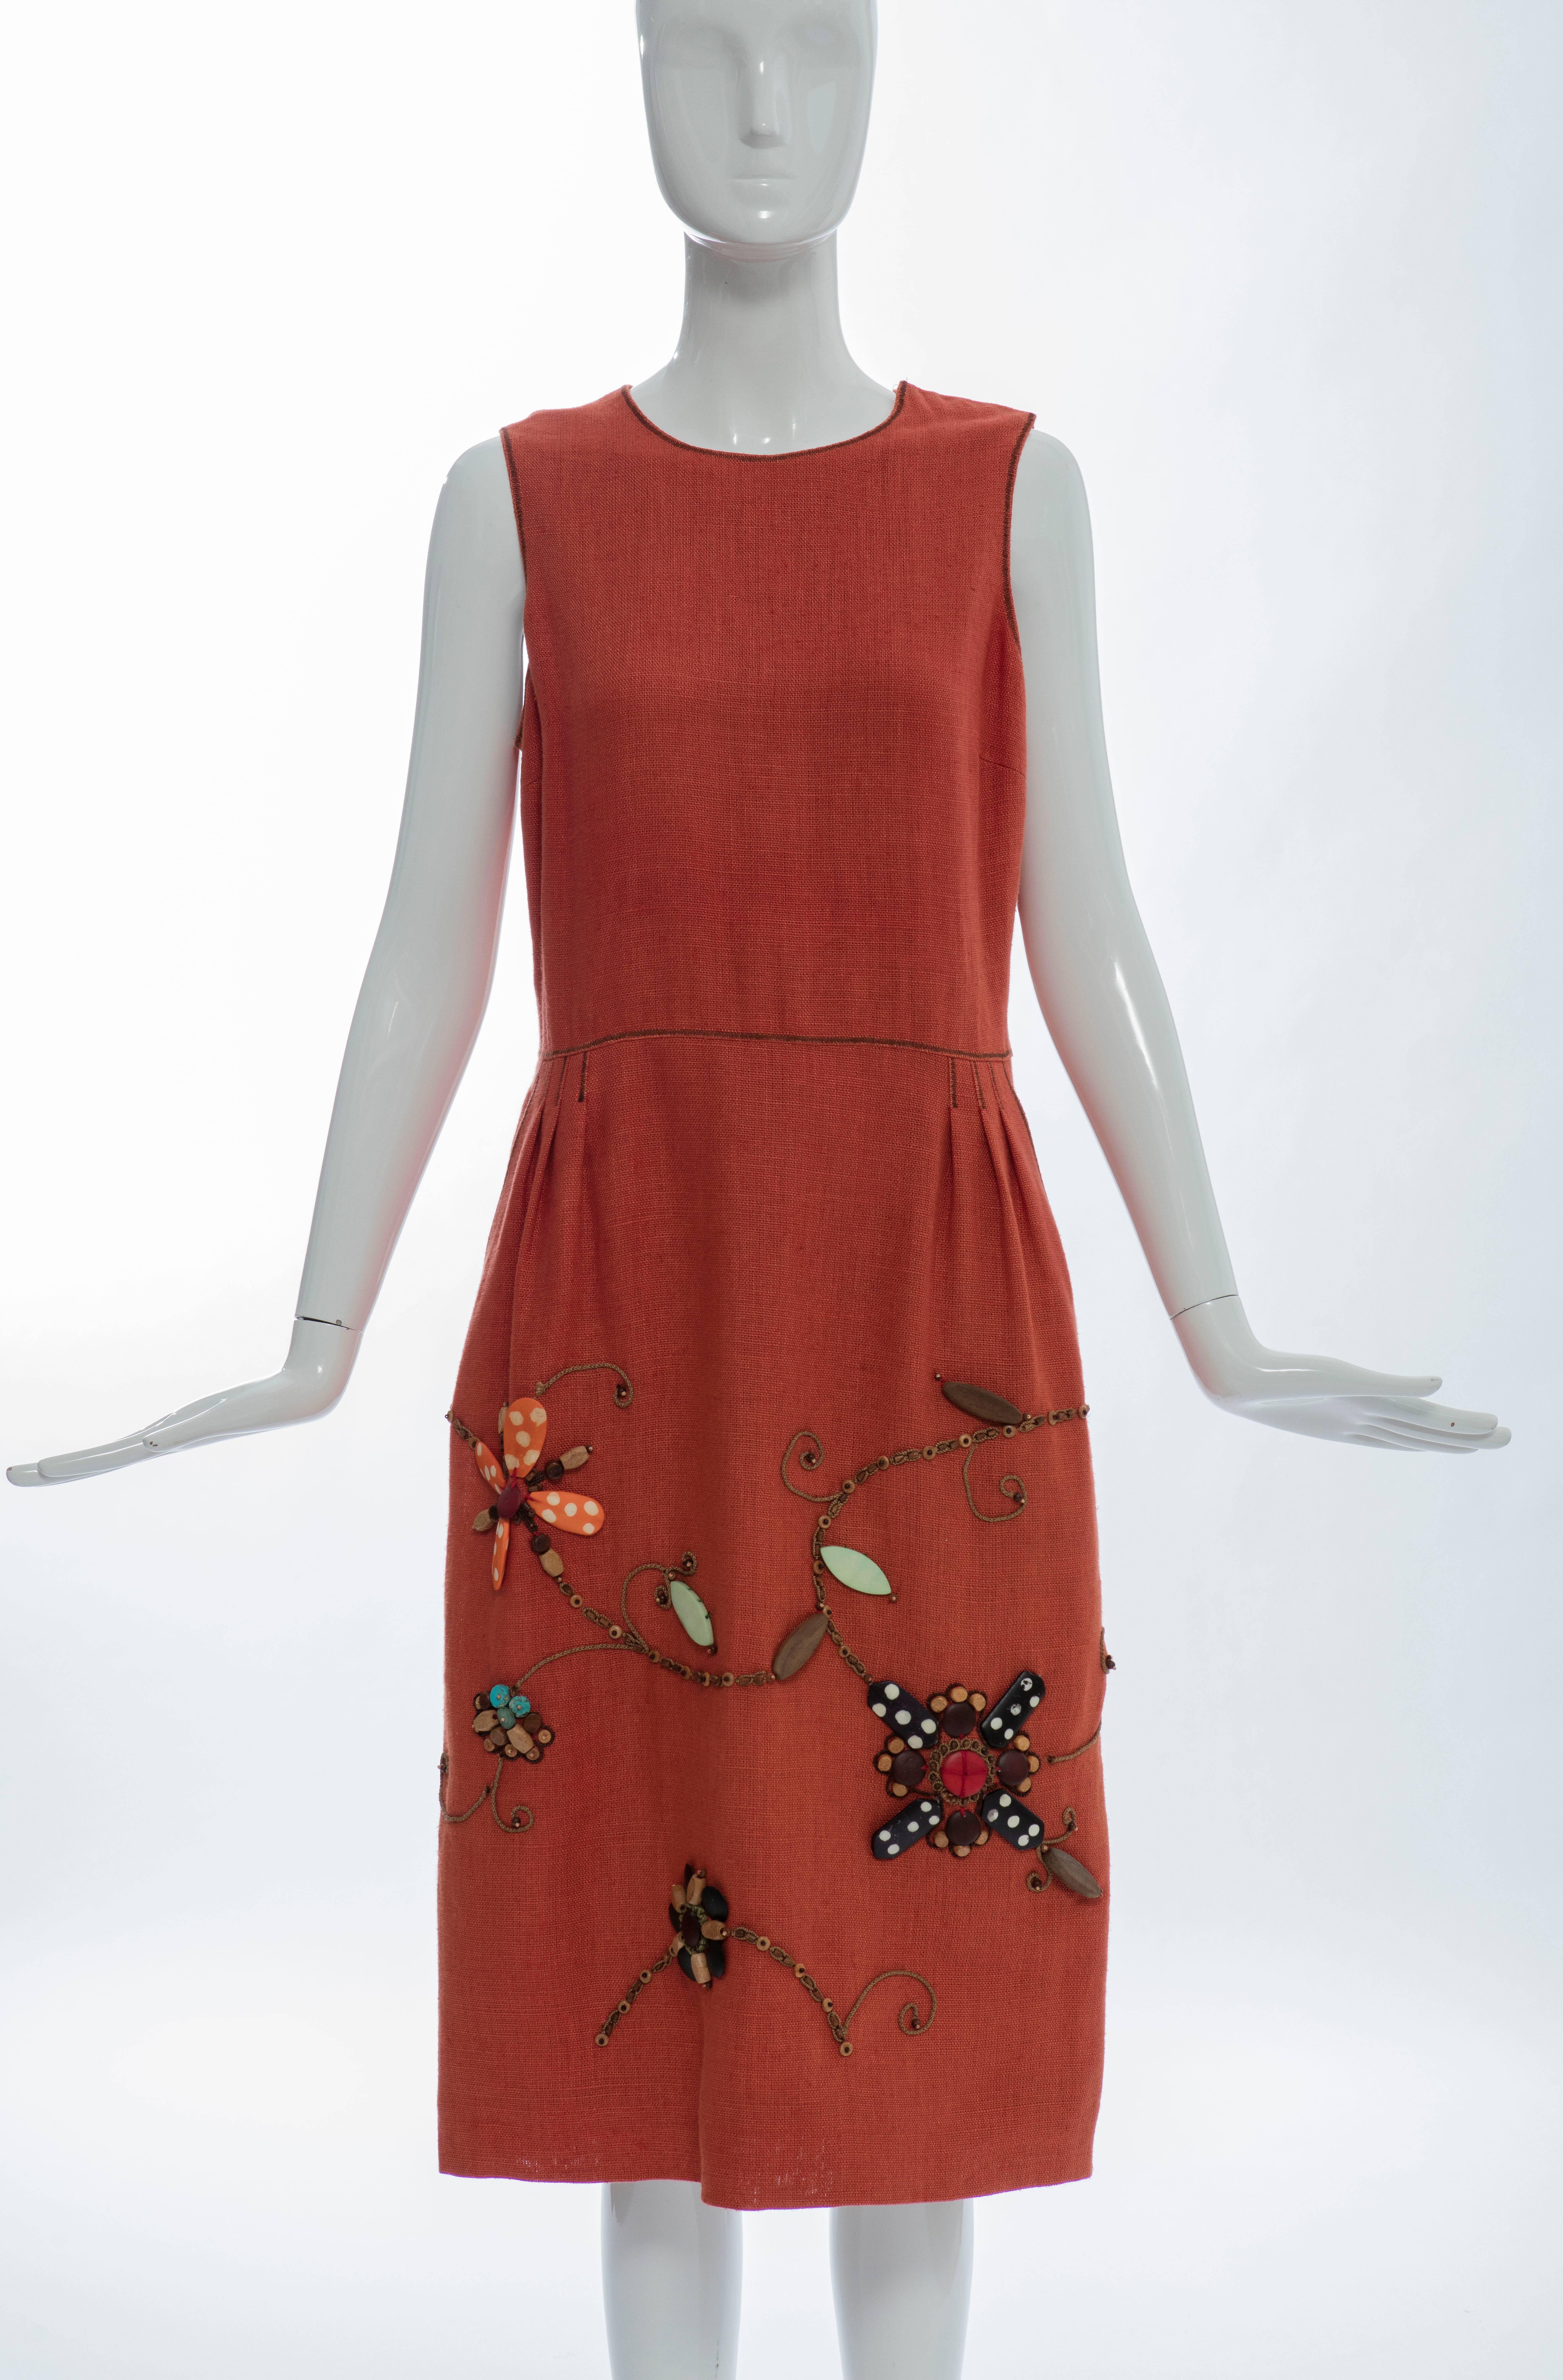 Oscar de la Renta, Spring-Summer 2006 terracotta linen sleeveless dress with pleated waist, wood bead embroidery, two silk lined front pockets side zip and hook and eye closure and fully lined in silk.

Retail: $2450

US. 10

Bust 38, Waist 31, Hips